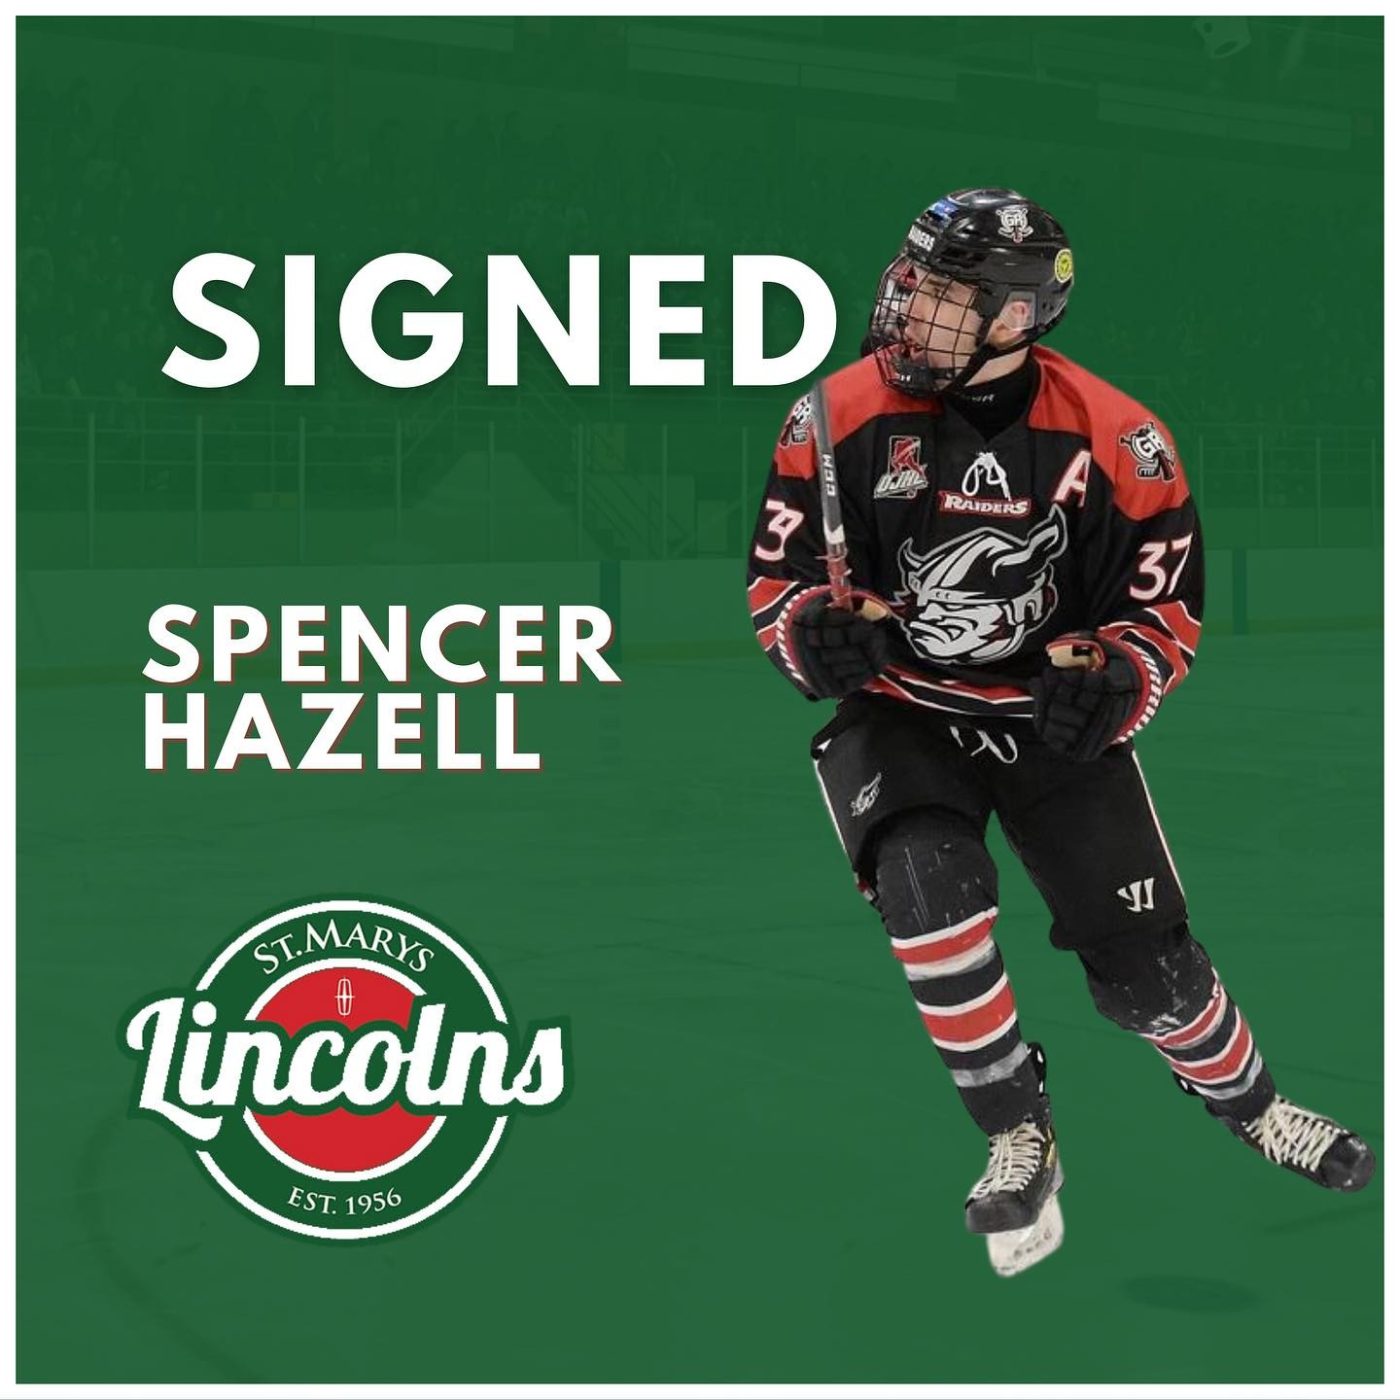 SIGNED - Lincs welcome 20 year old Free Agent FWD, Spencer Hazell! The former 8th round Owen Sound Attack draft pick comes to the Stonetown after 3 years with the Georgetown Raiders of the OJHL! #WeAreLincolns @spencer.hazell